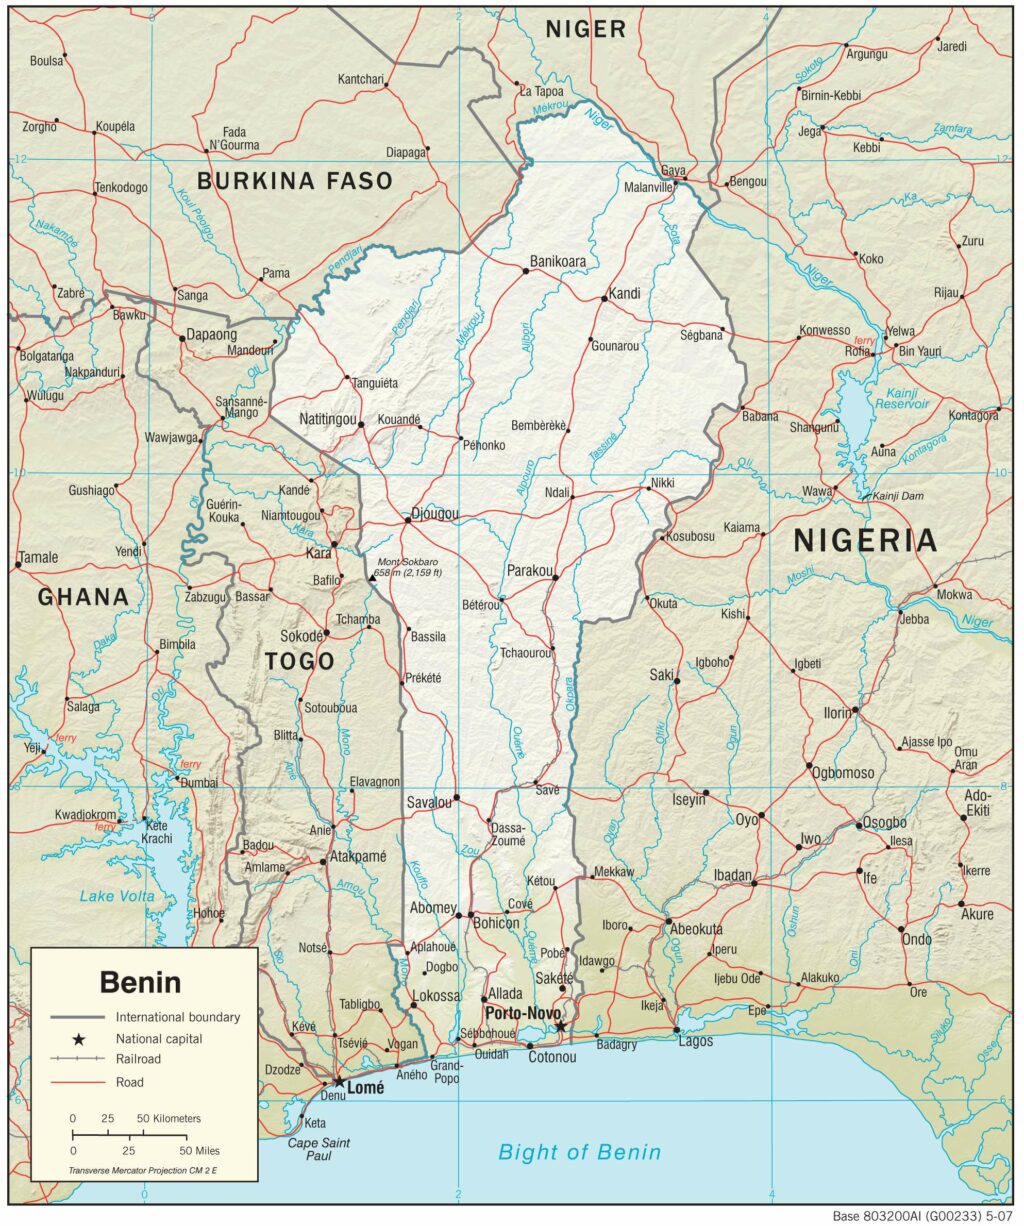 Benin physiography map.